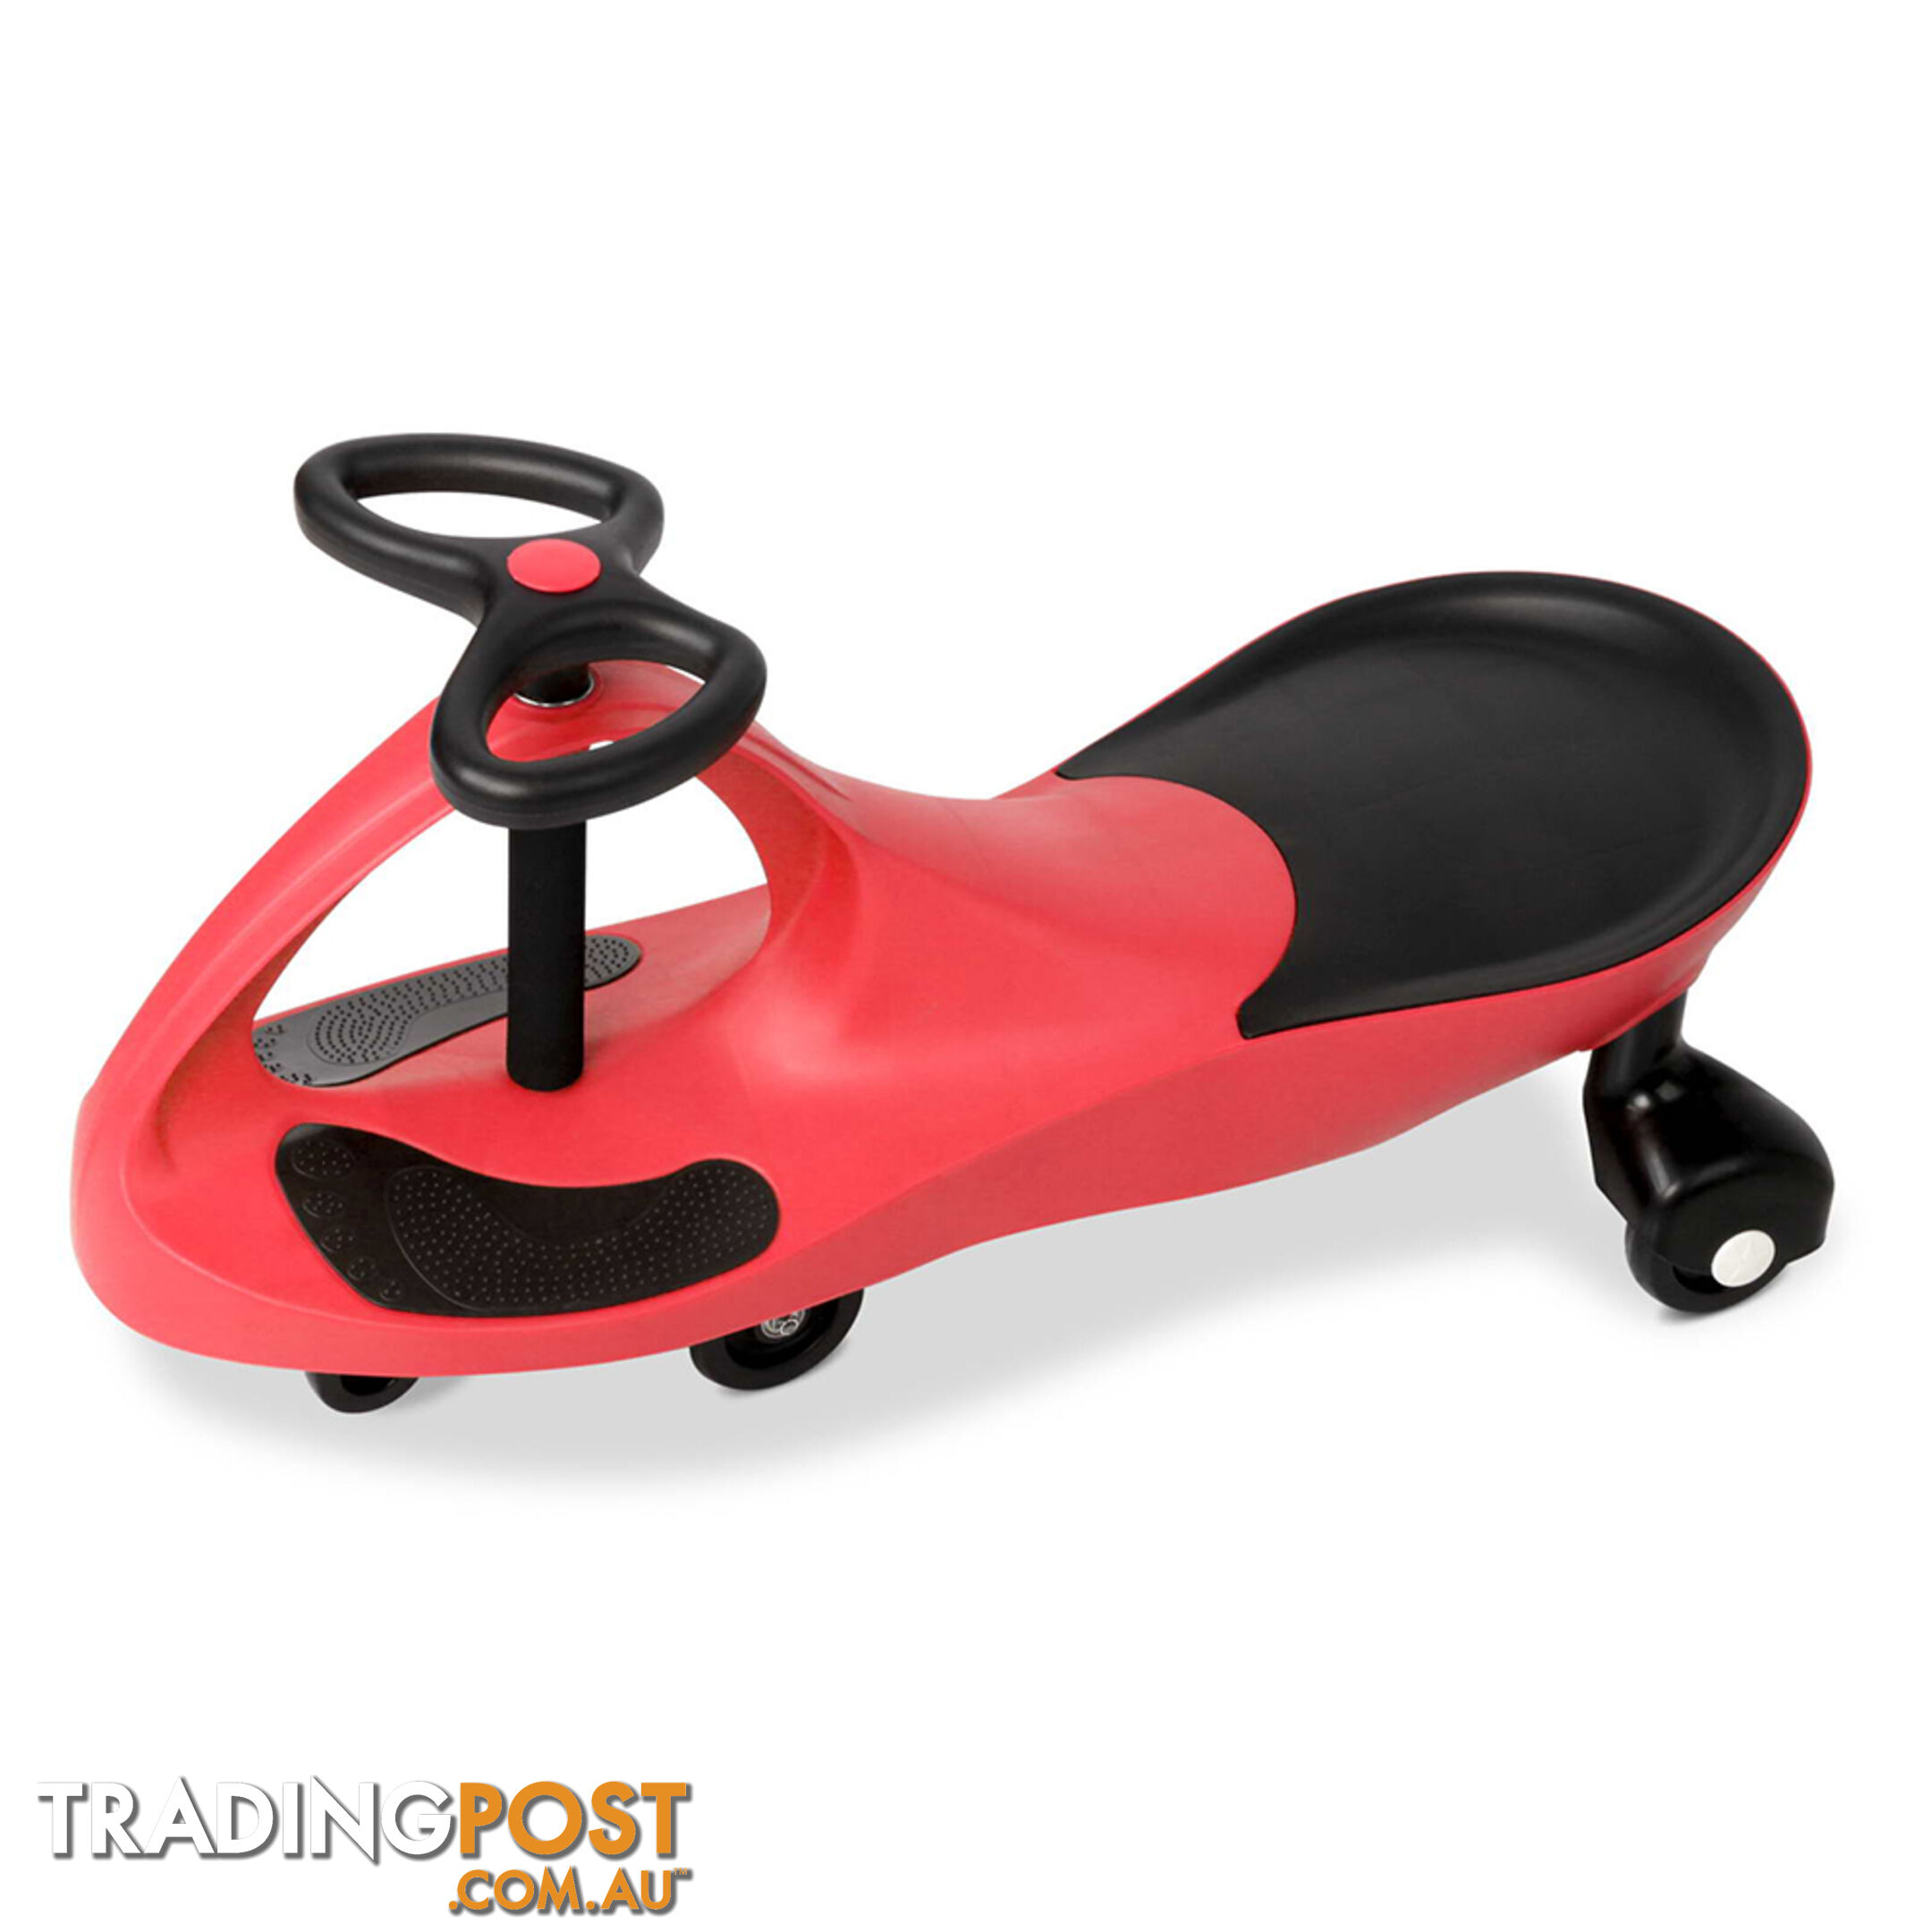 Pedal Free Swing Car - Red